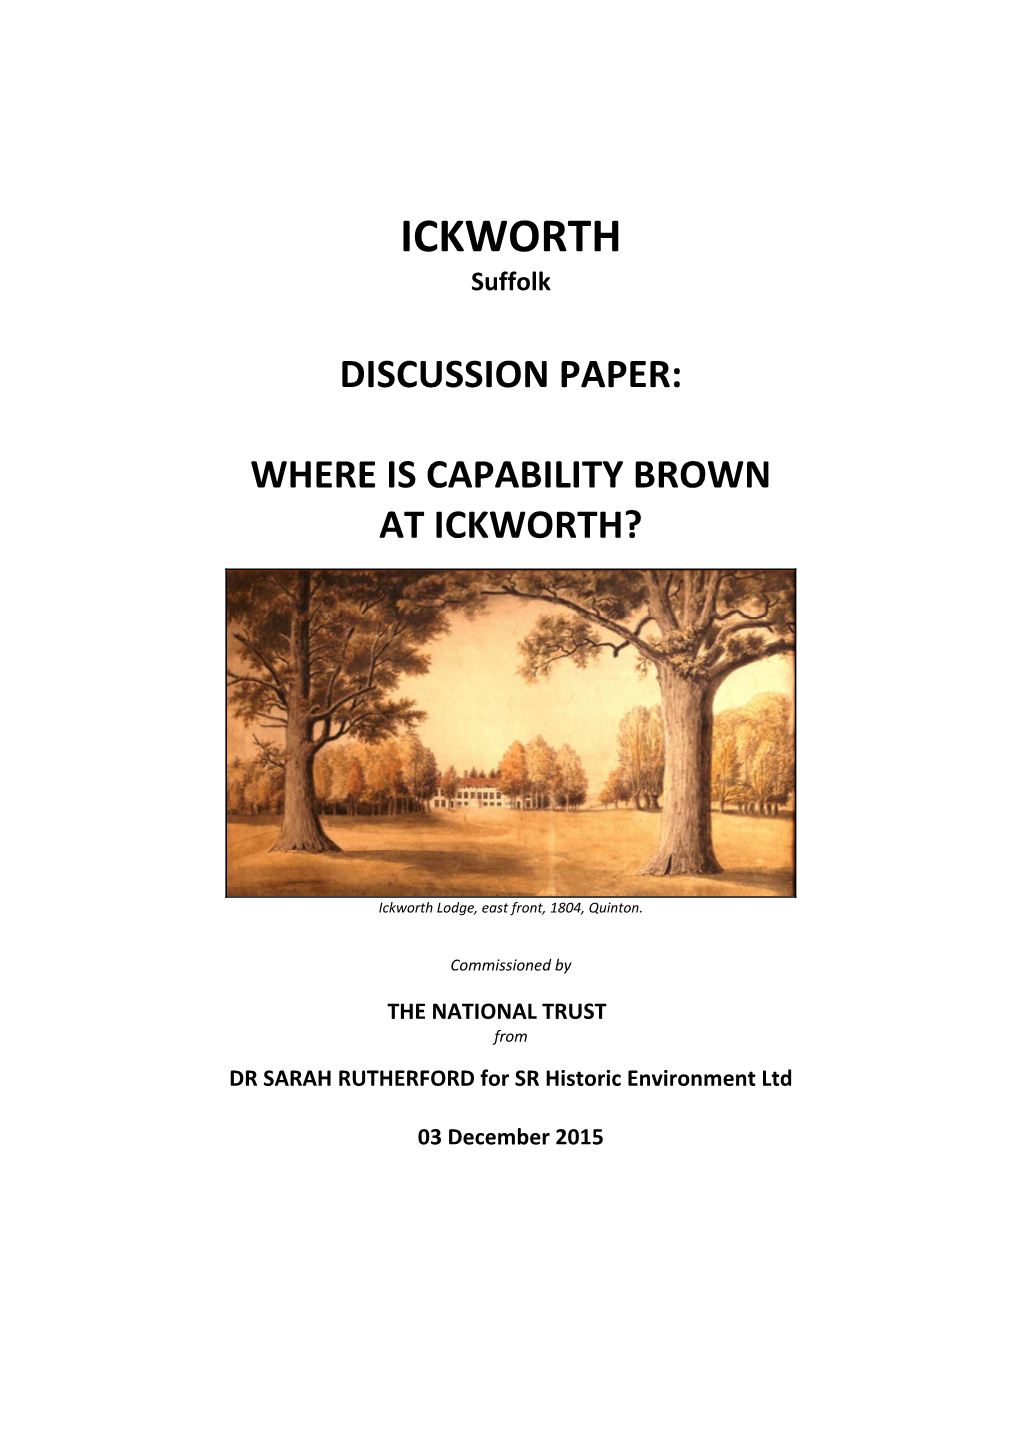 Discussion Paper: Where Is Capability Brown at Ickworth? S Rutherford 03 December 2015